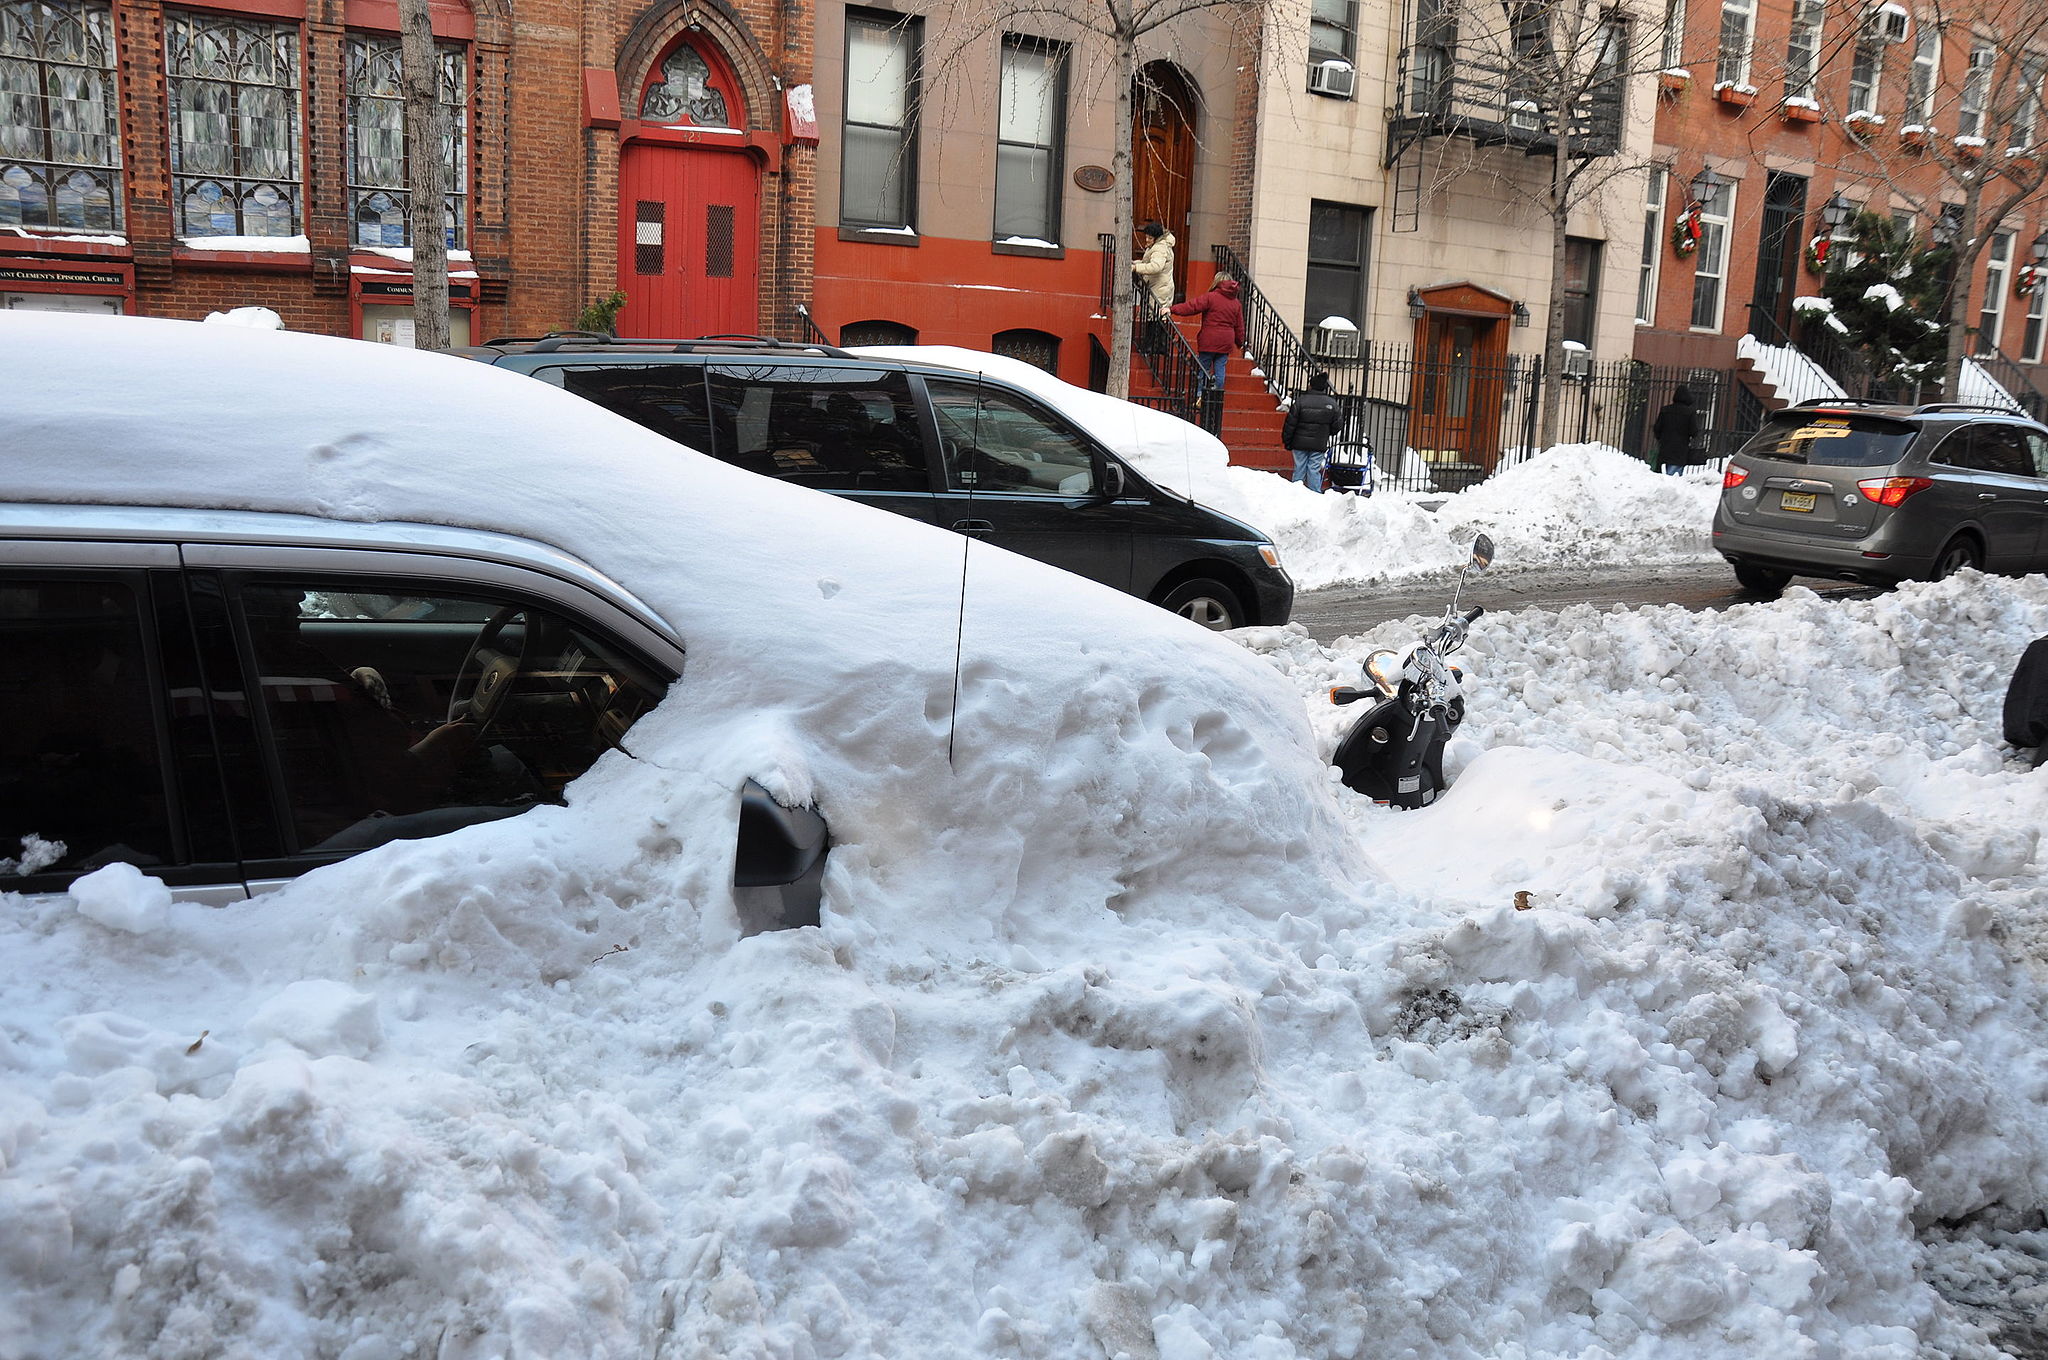 Winter Emergency Tools to Have in Your Car - Park NYC